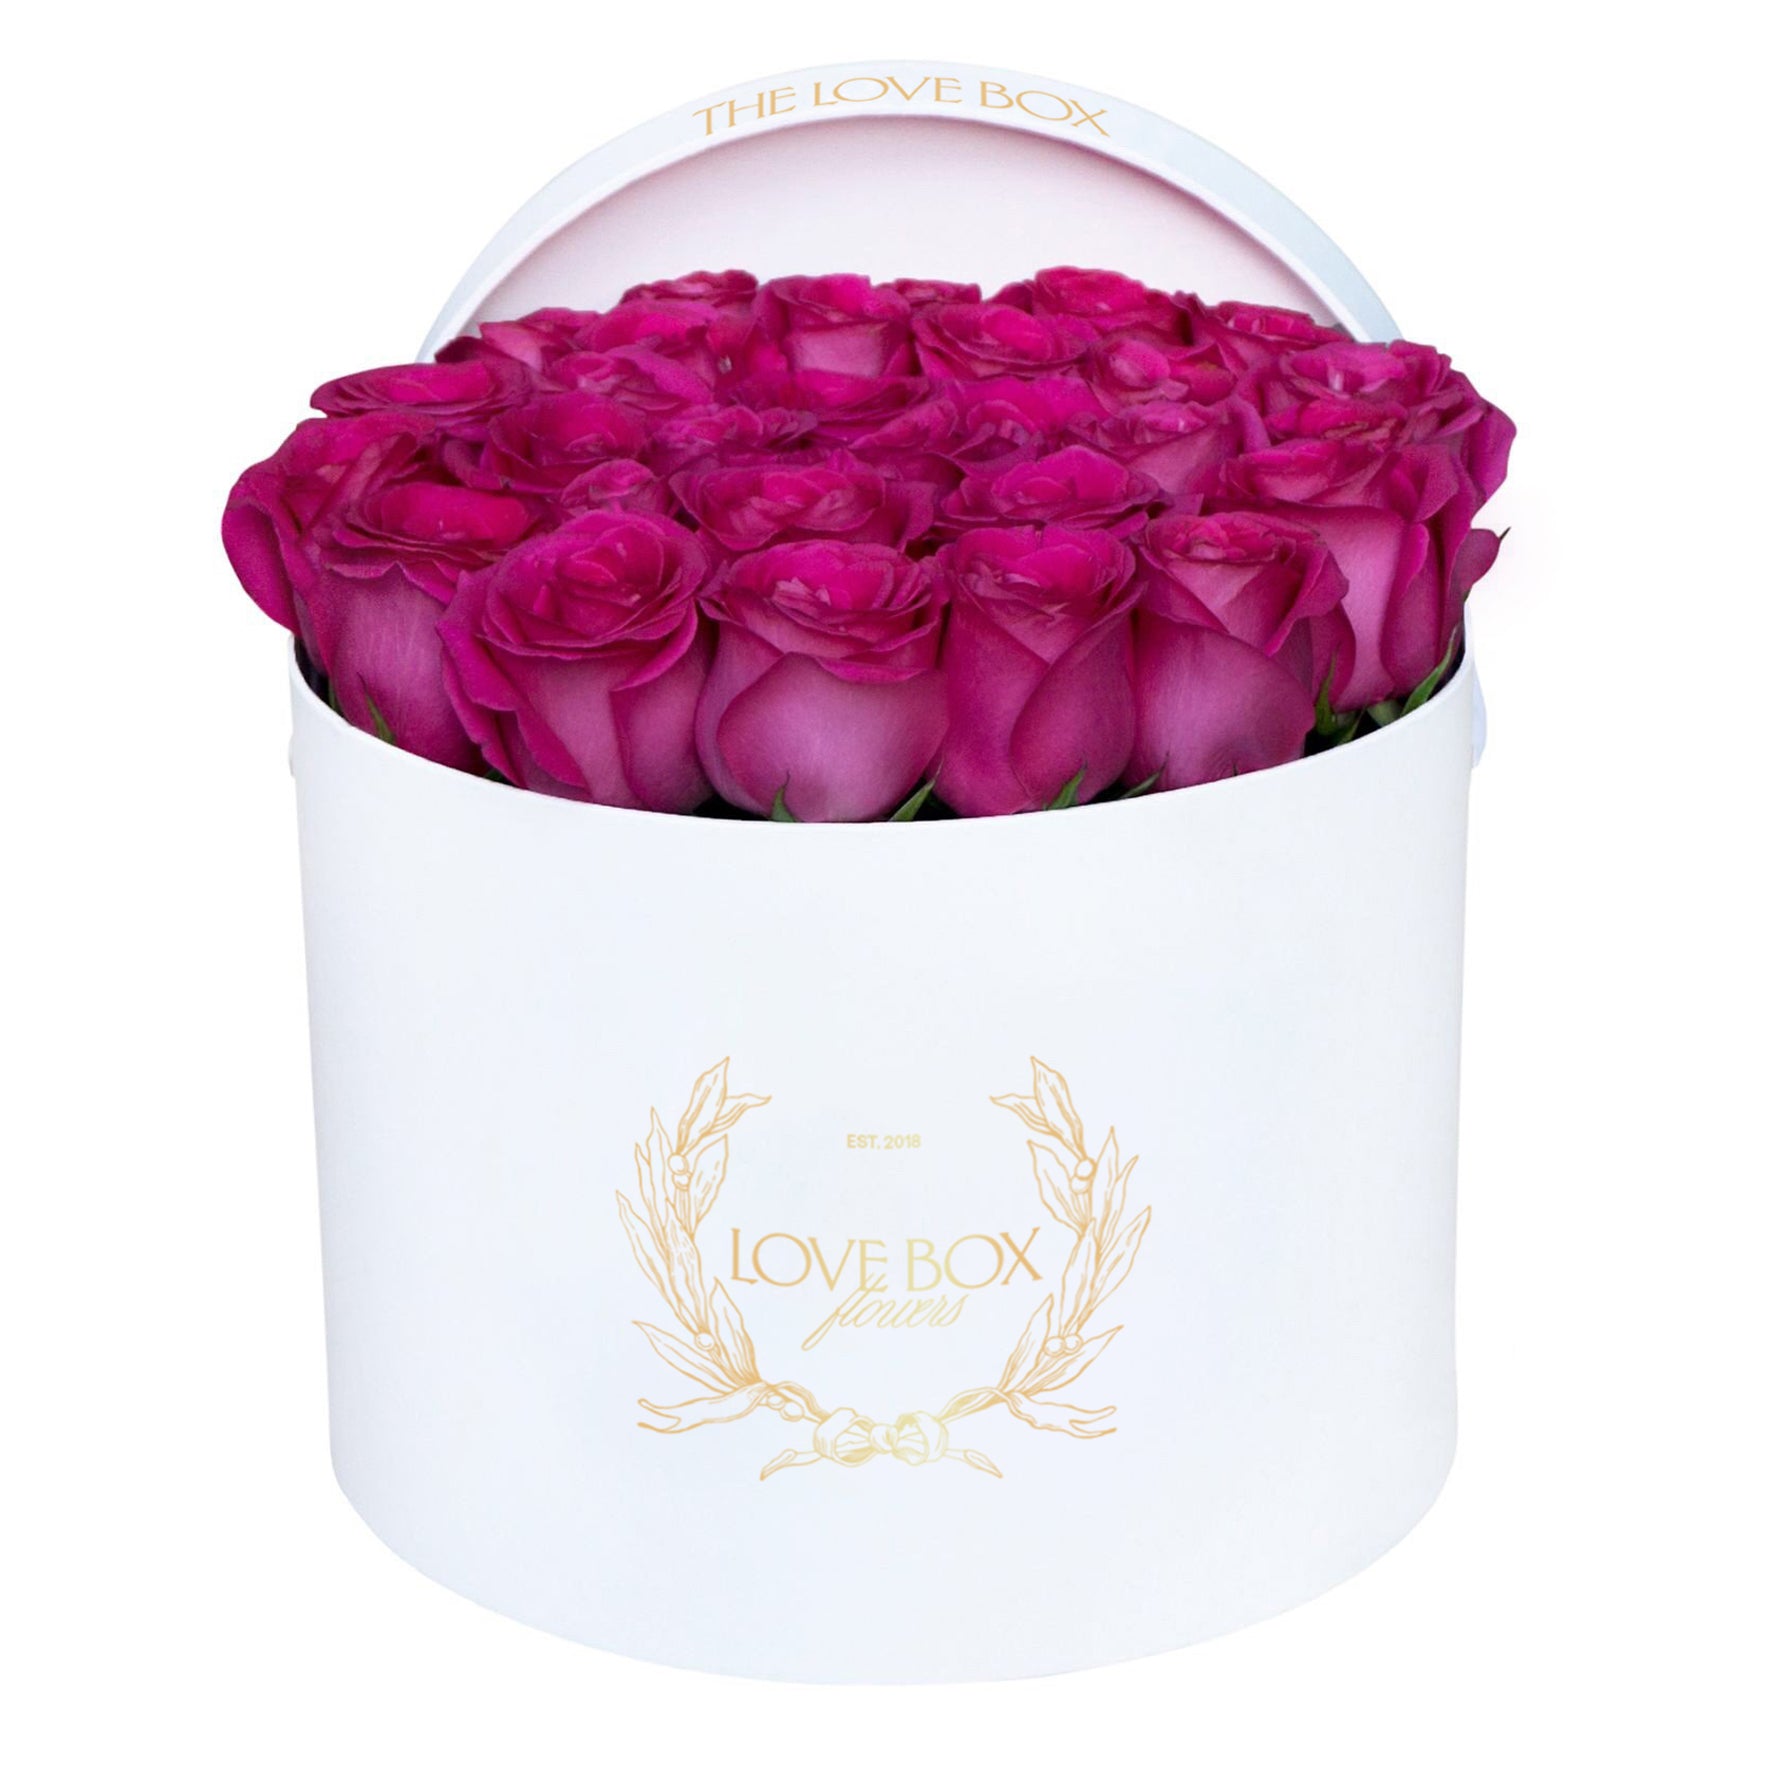 Hot Pink Roses in Large White Box